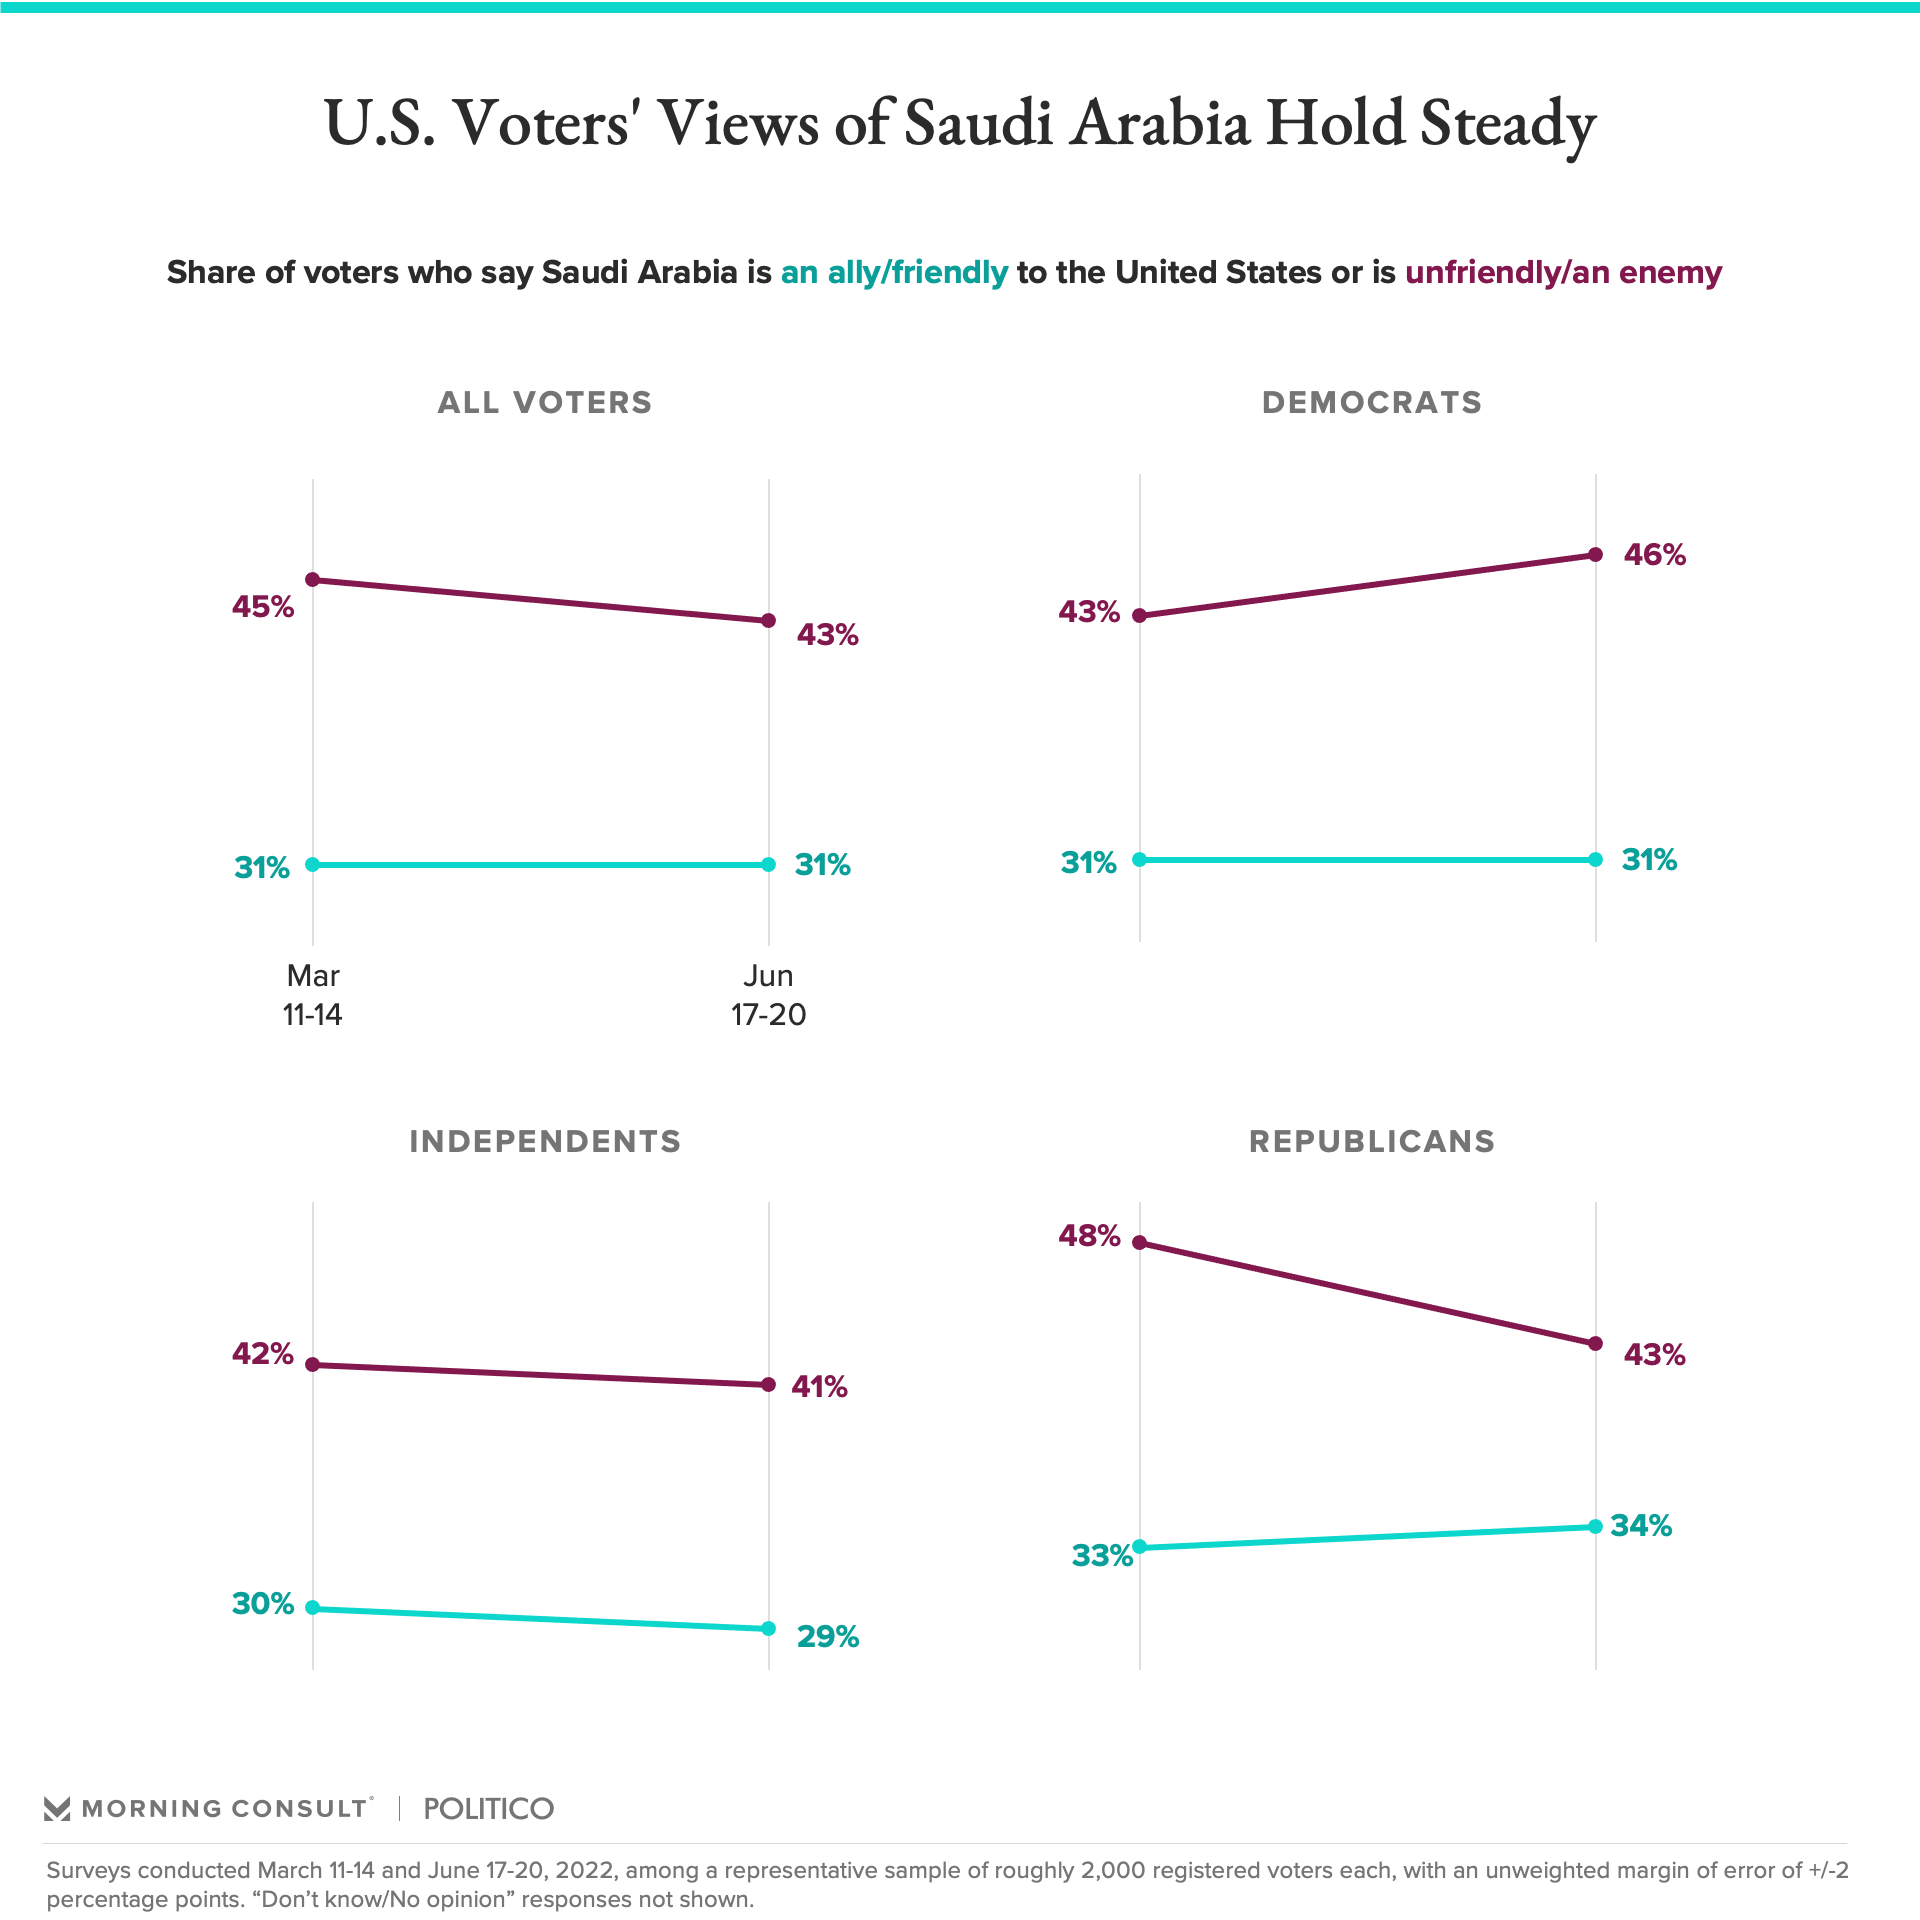 Chart conveying Americans' views of Saudi Arabia as an ally or as an enemy